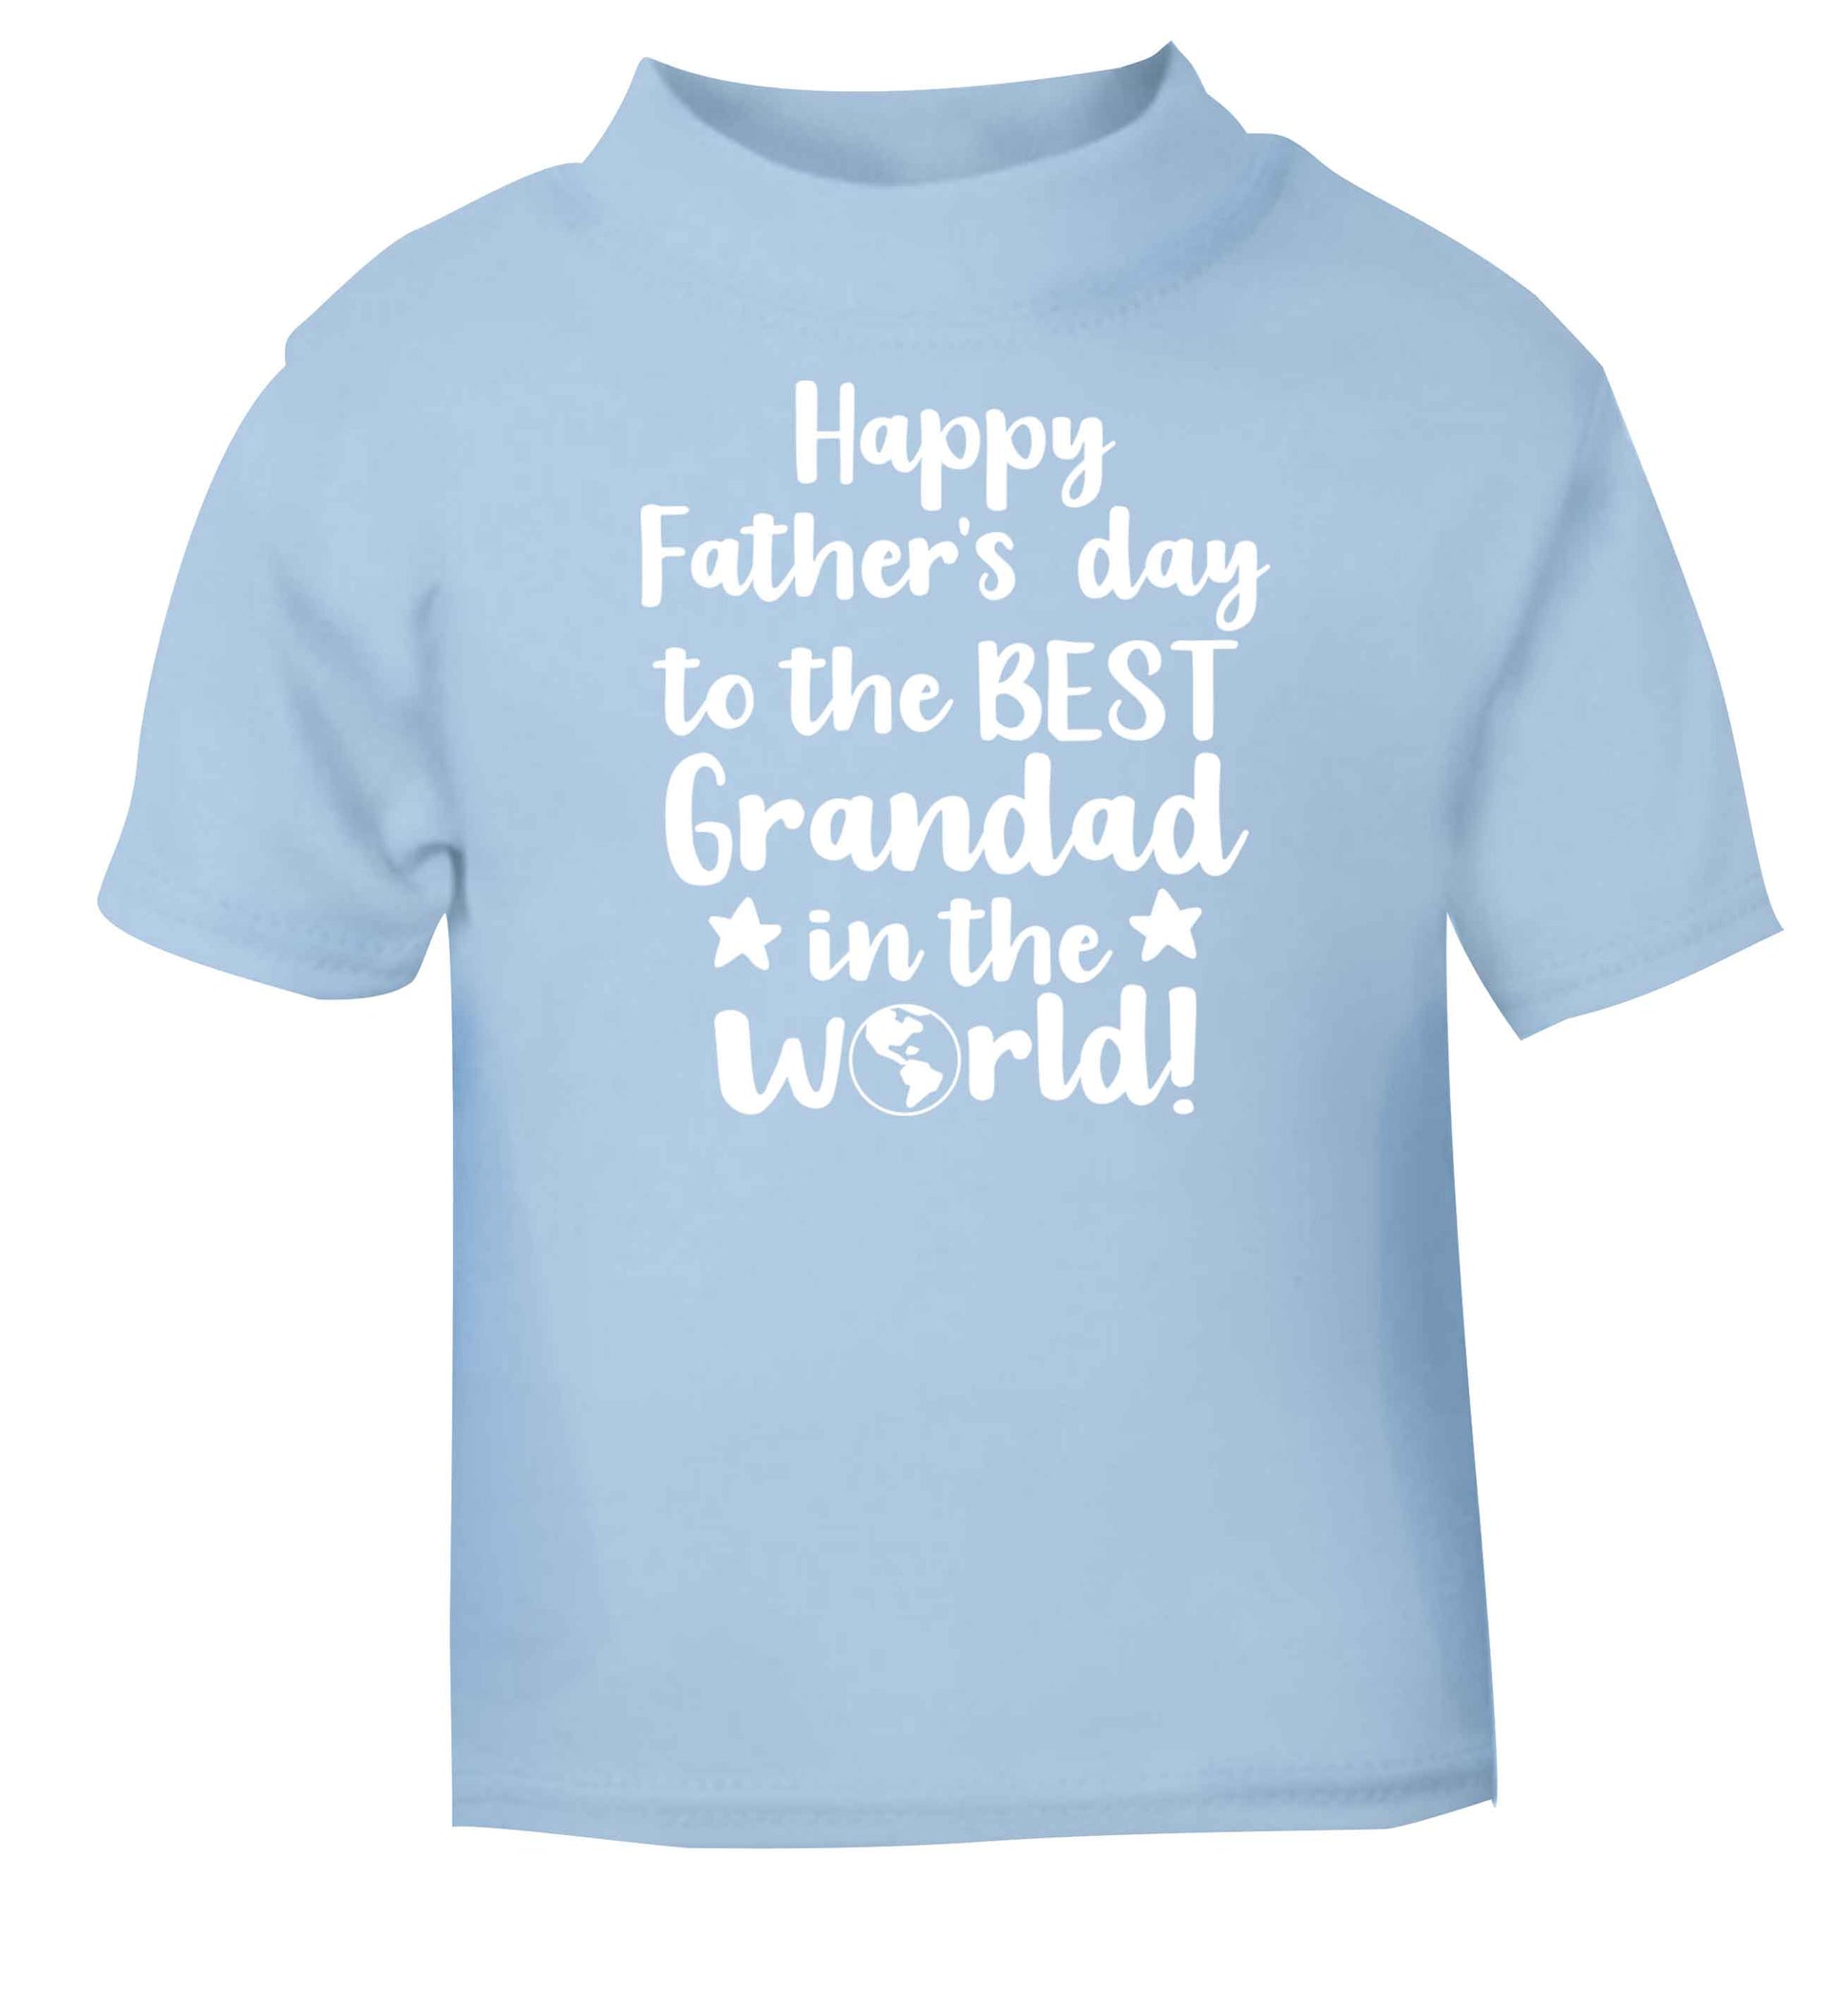 Happy Father's day to the best grandad in the world light blue baby toddler Tshirt 2 Years